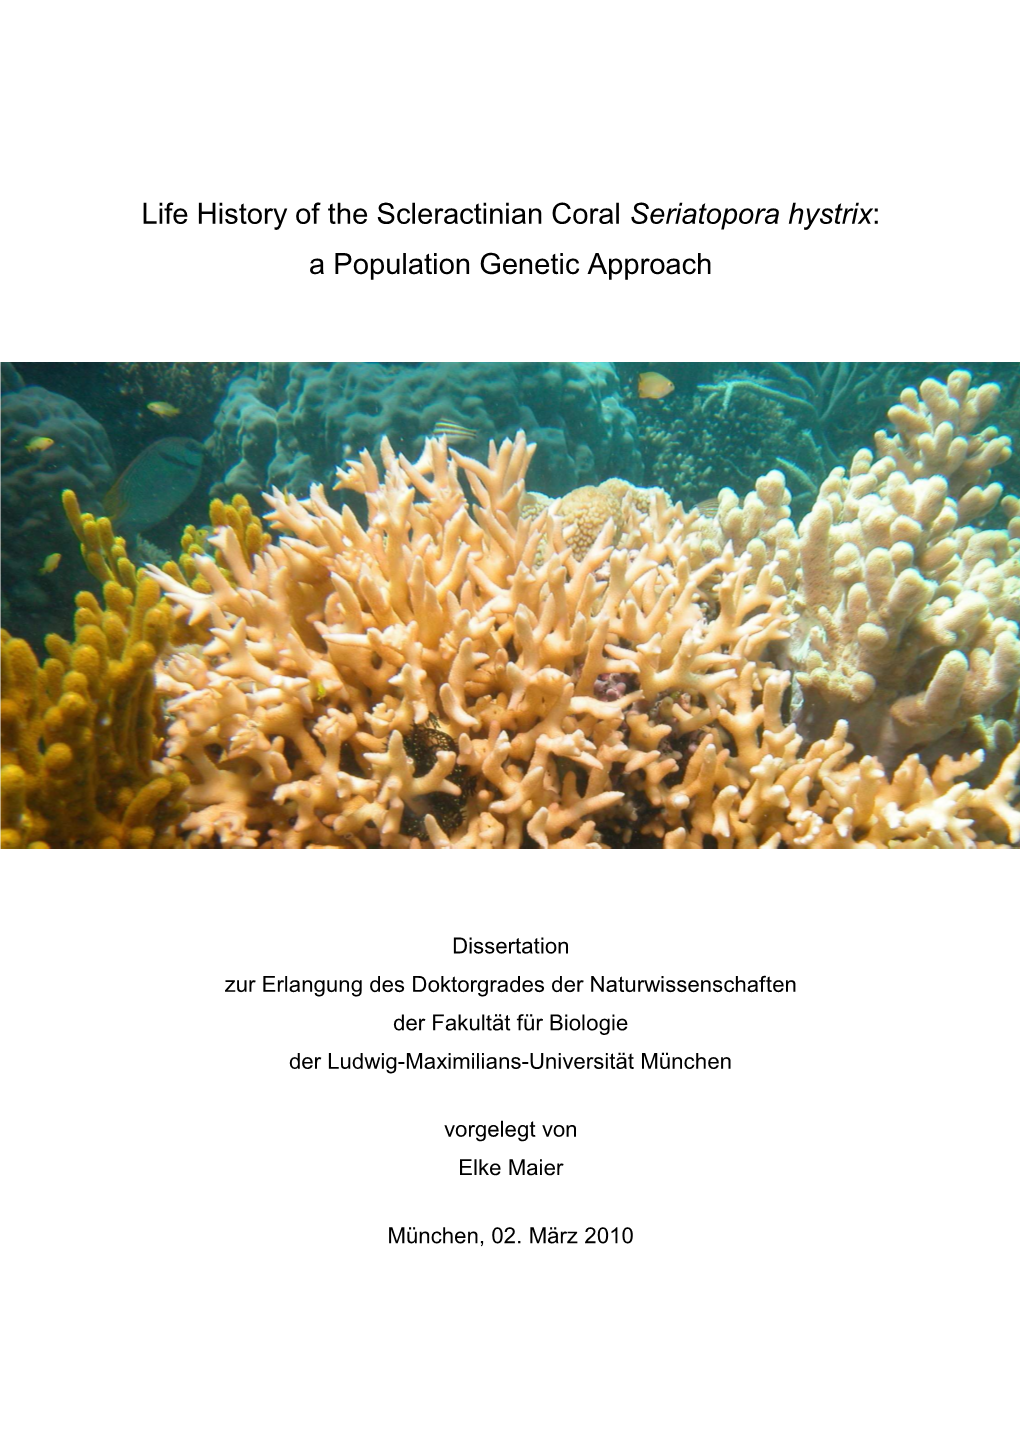 Life History of the Scleractinian Coral Seriatopora Hystrix: a Population Genetic Approach